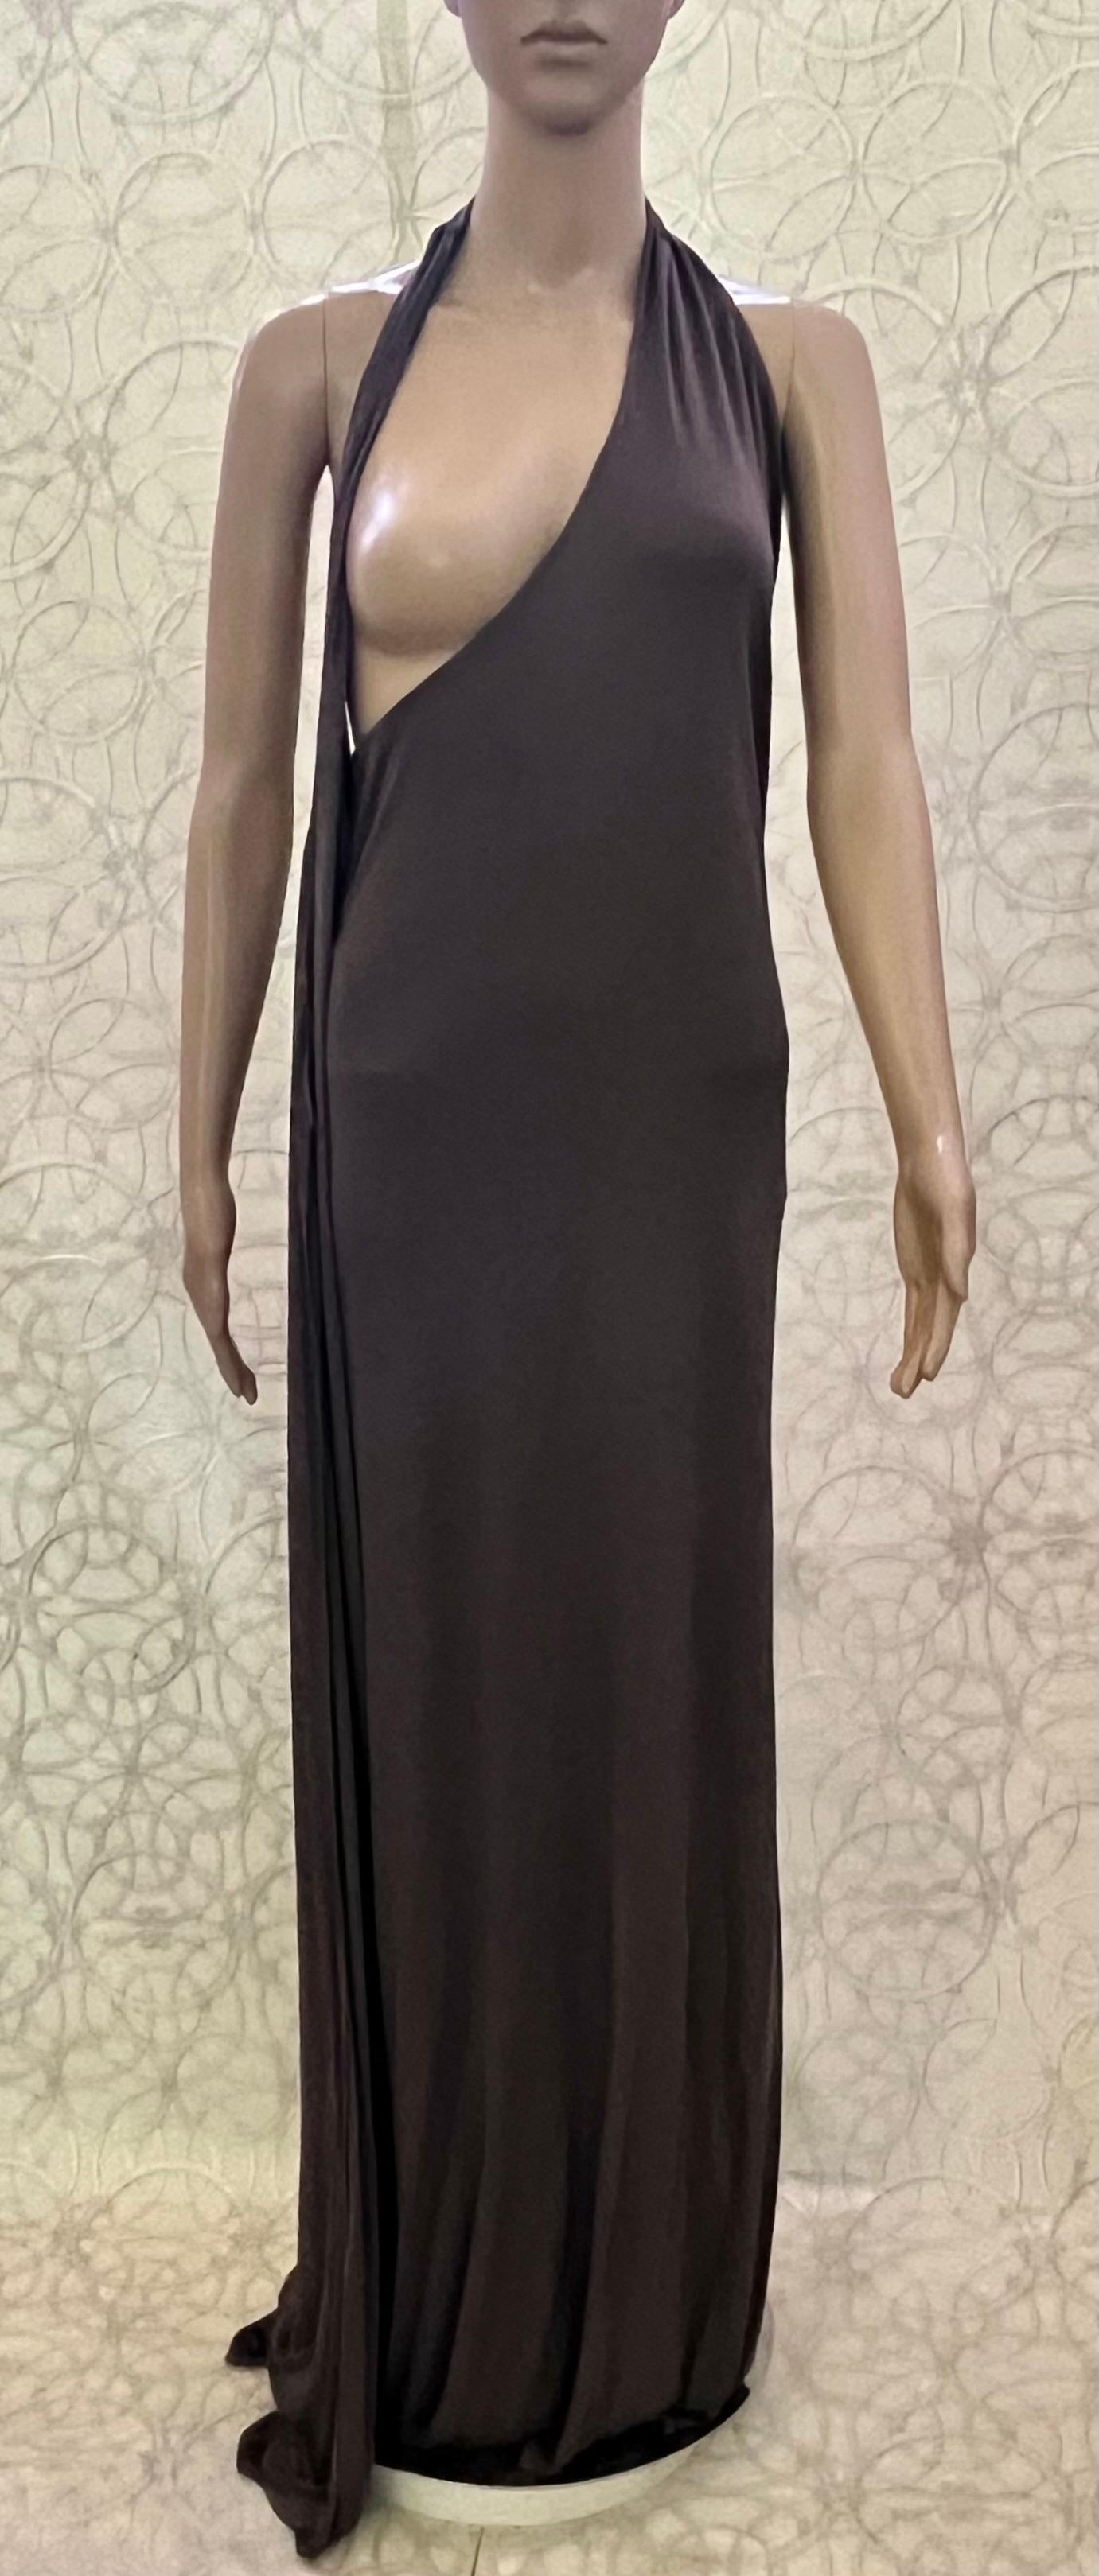 GUCCI by TOM FORD VINTAGE PEWTER WRAP LONG DRESS GOWN Size IT 42 1